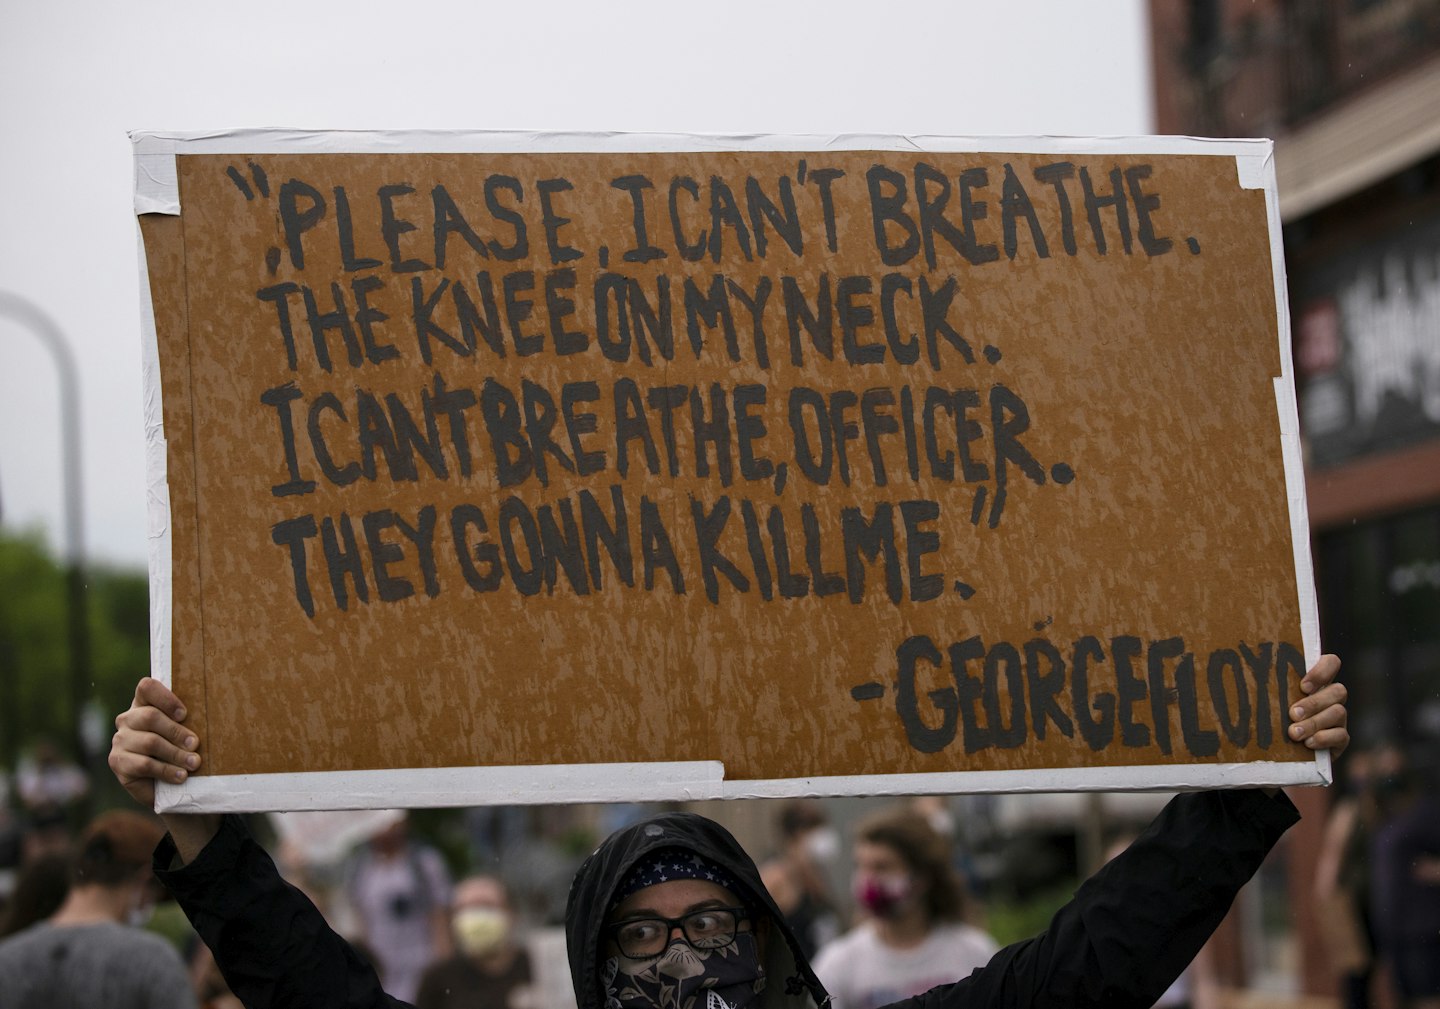 A protester holds a sign while demonstrating against the death of George Floyd outside the 3rd Precinct Police Precinct on May 26, 2020 in Minneapolis, Minnesota